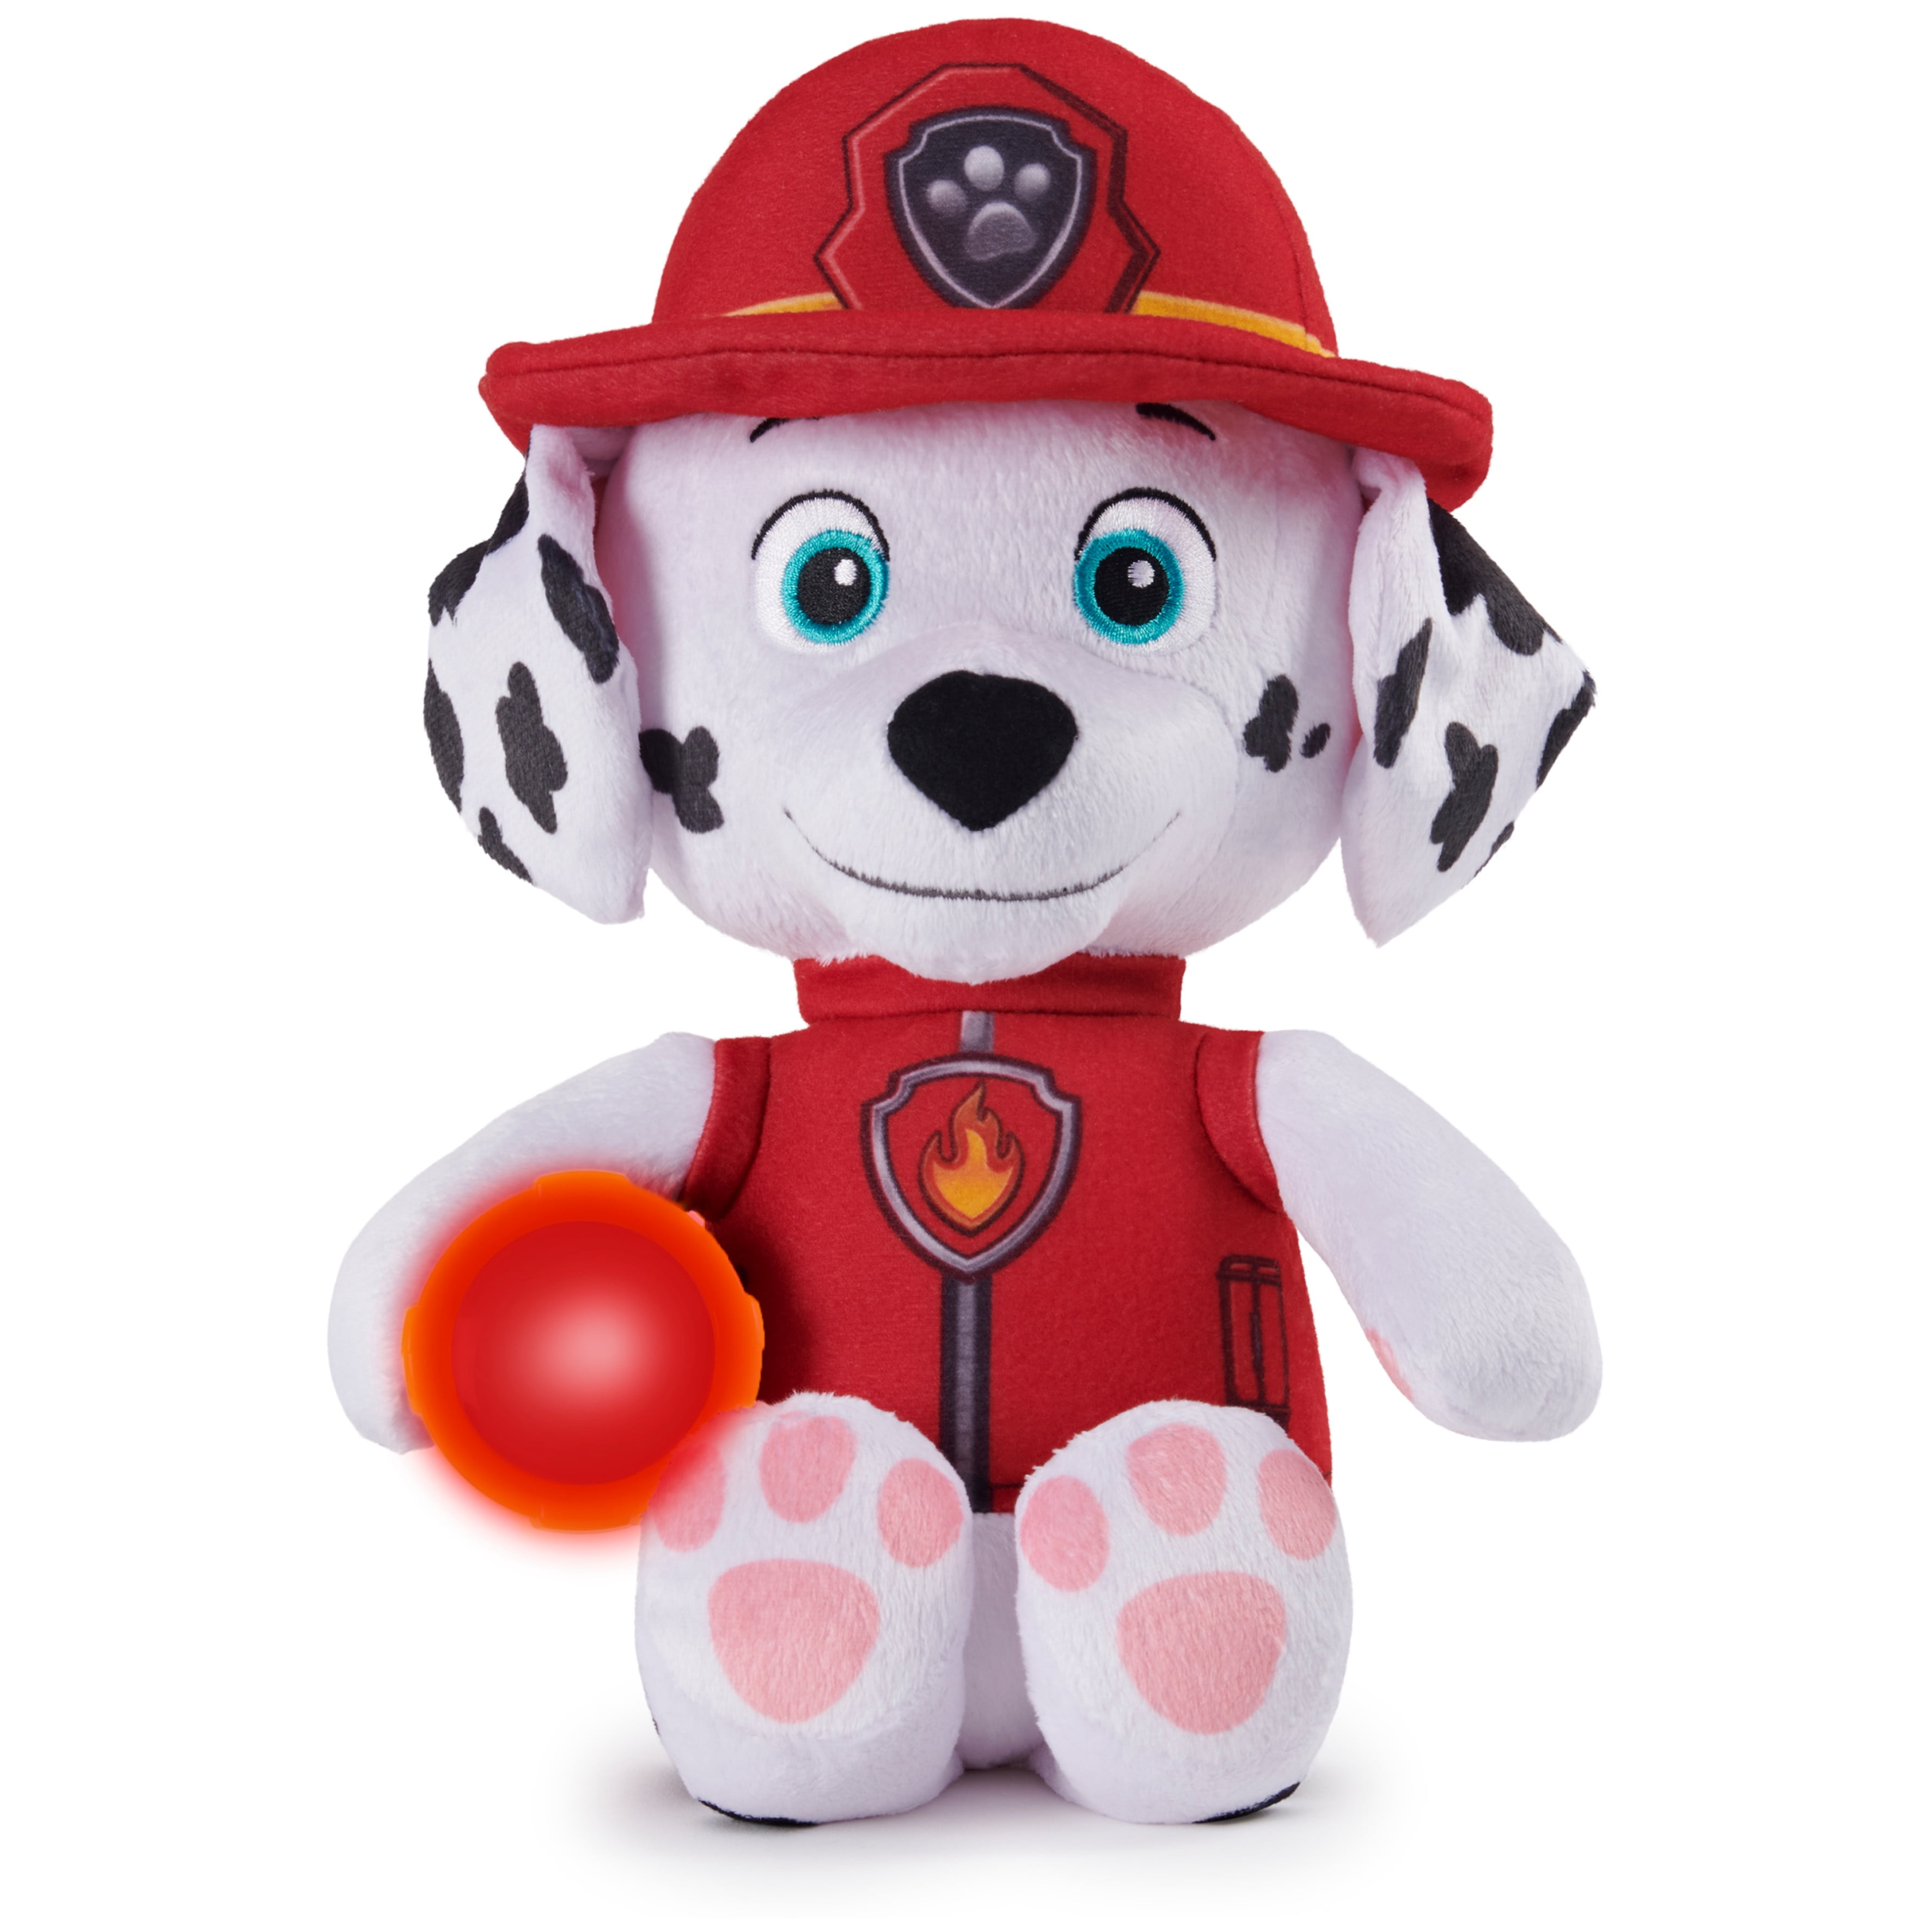 PAW Patrol, Snuggle Up Marshall Plush with Flashlight and Sounds, for Kids Aged 3 and up